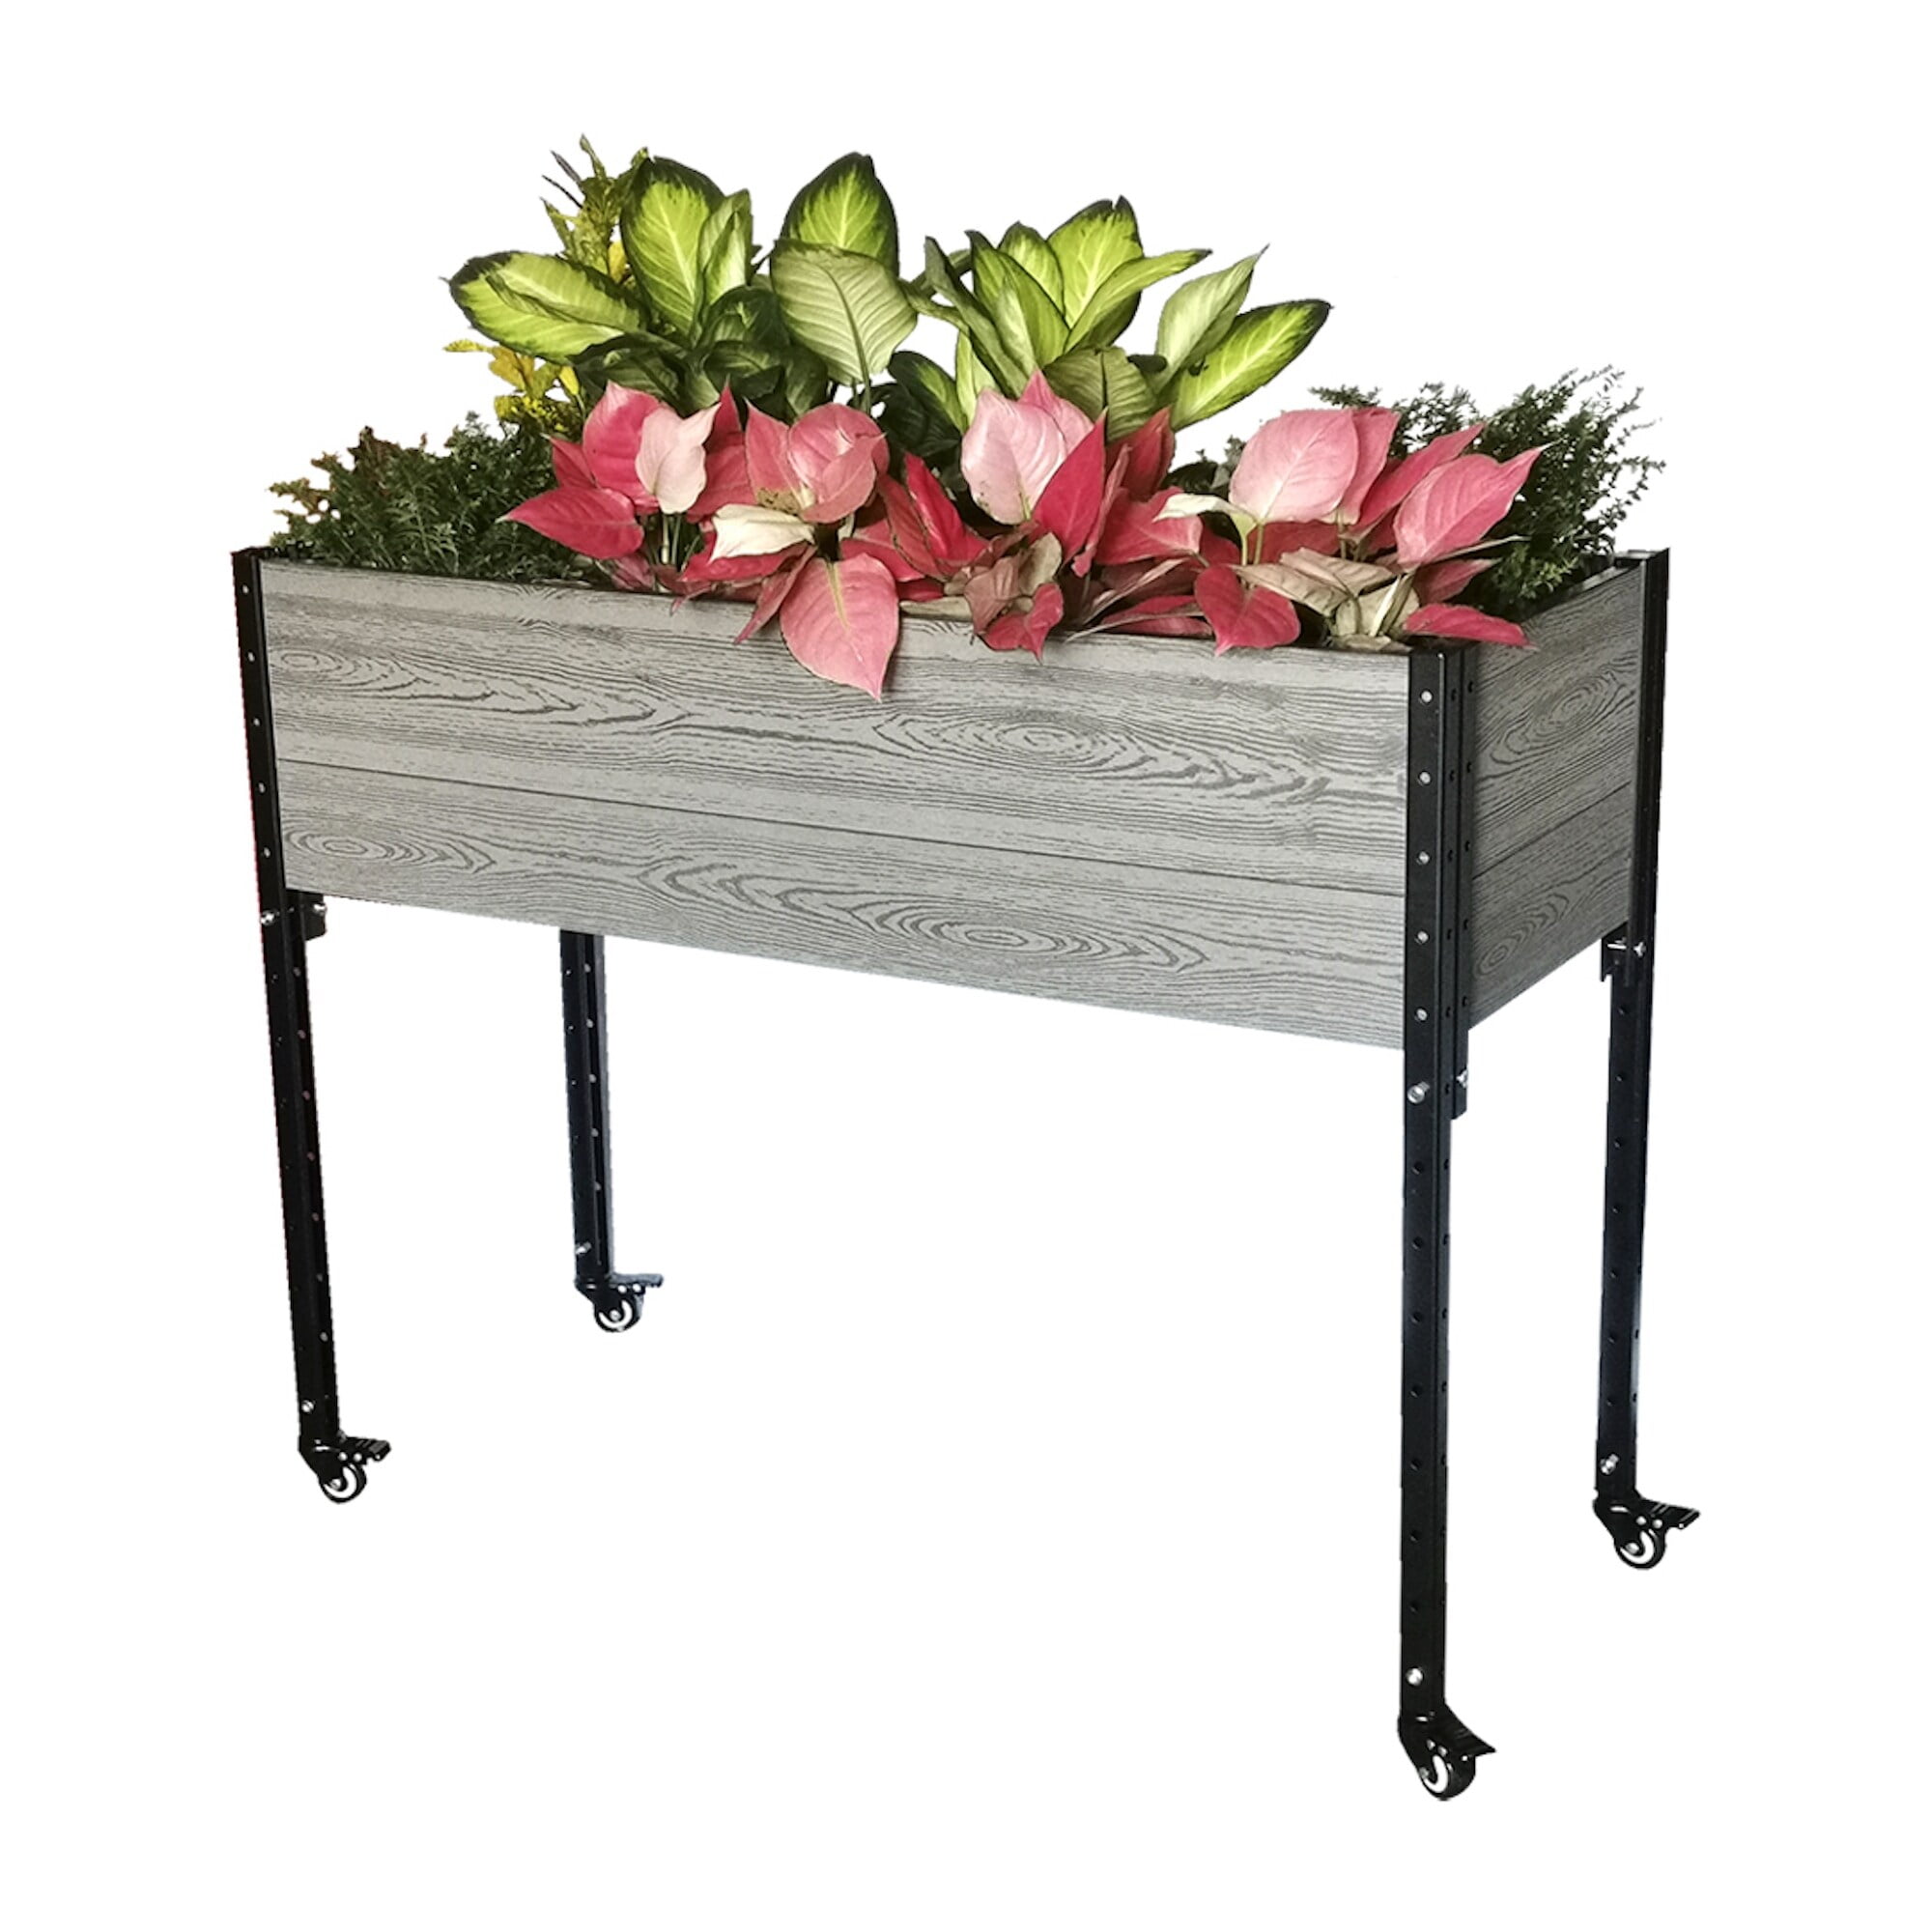 Picture of Everbloom E334519WG 45 x 19 x 36 in. Urban Mobile Garden Planter Box in Grey